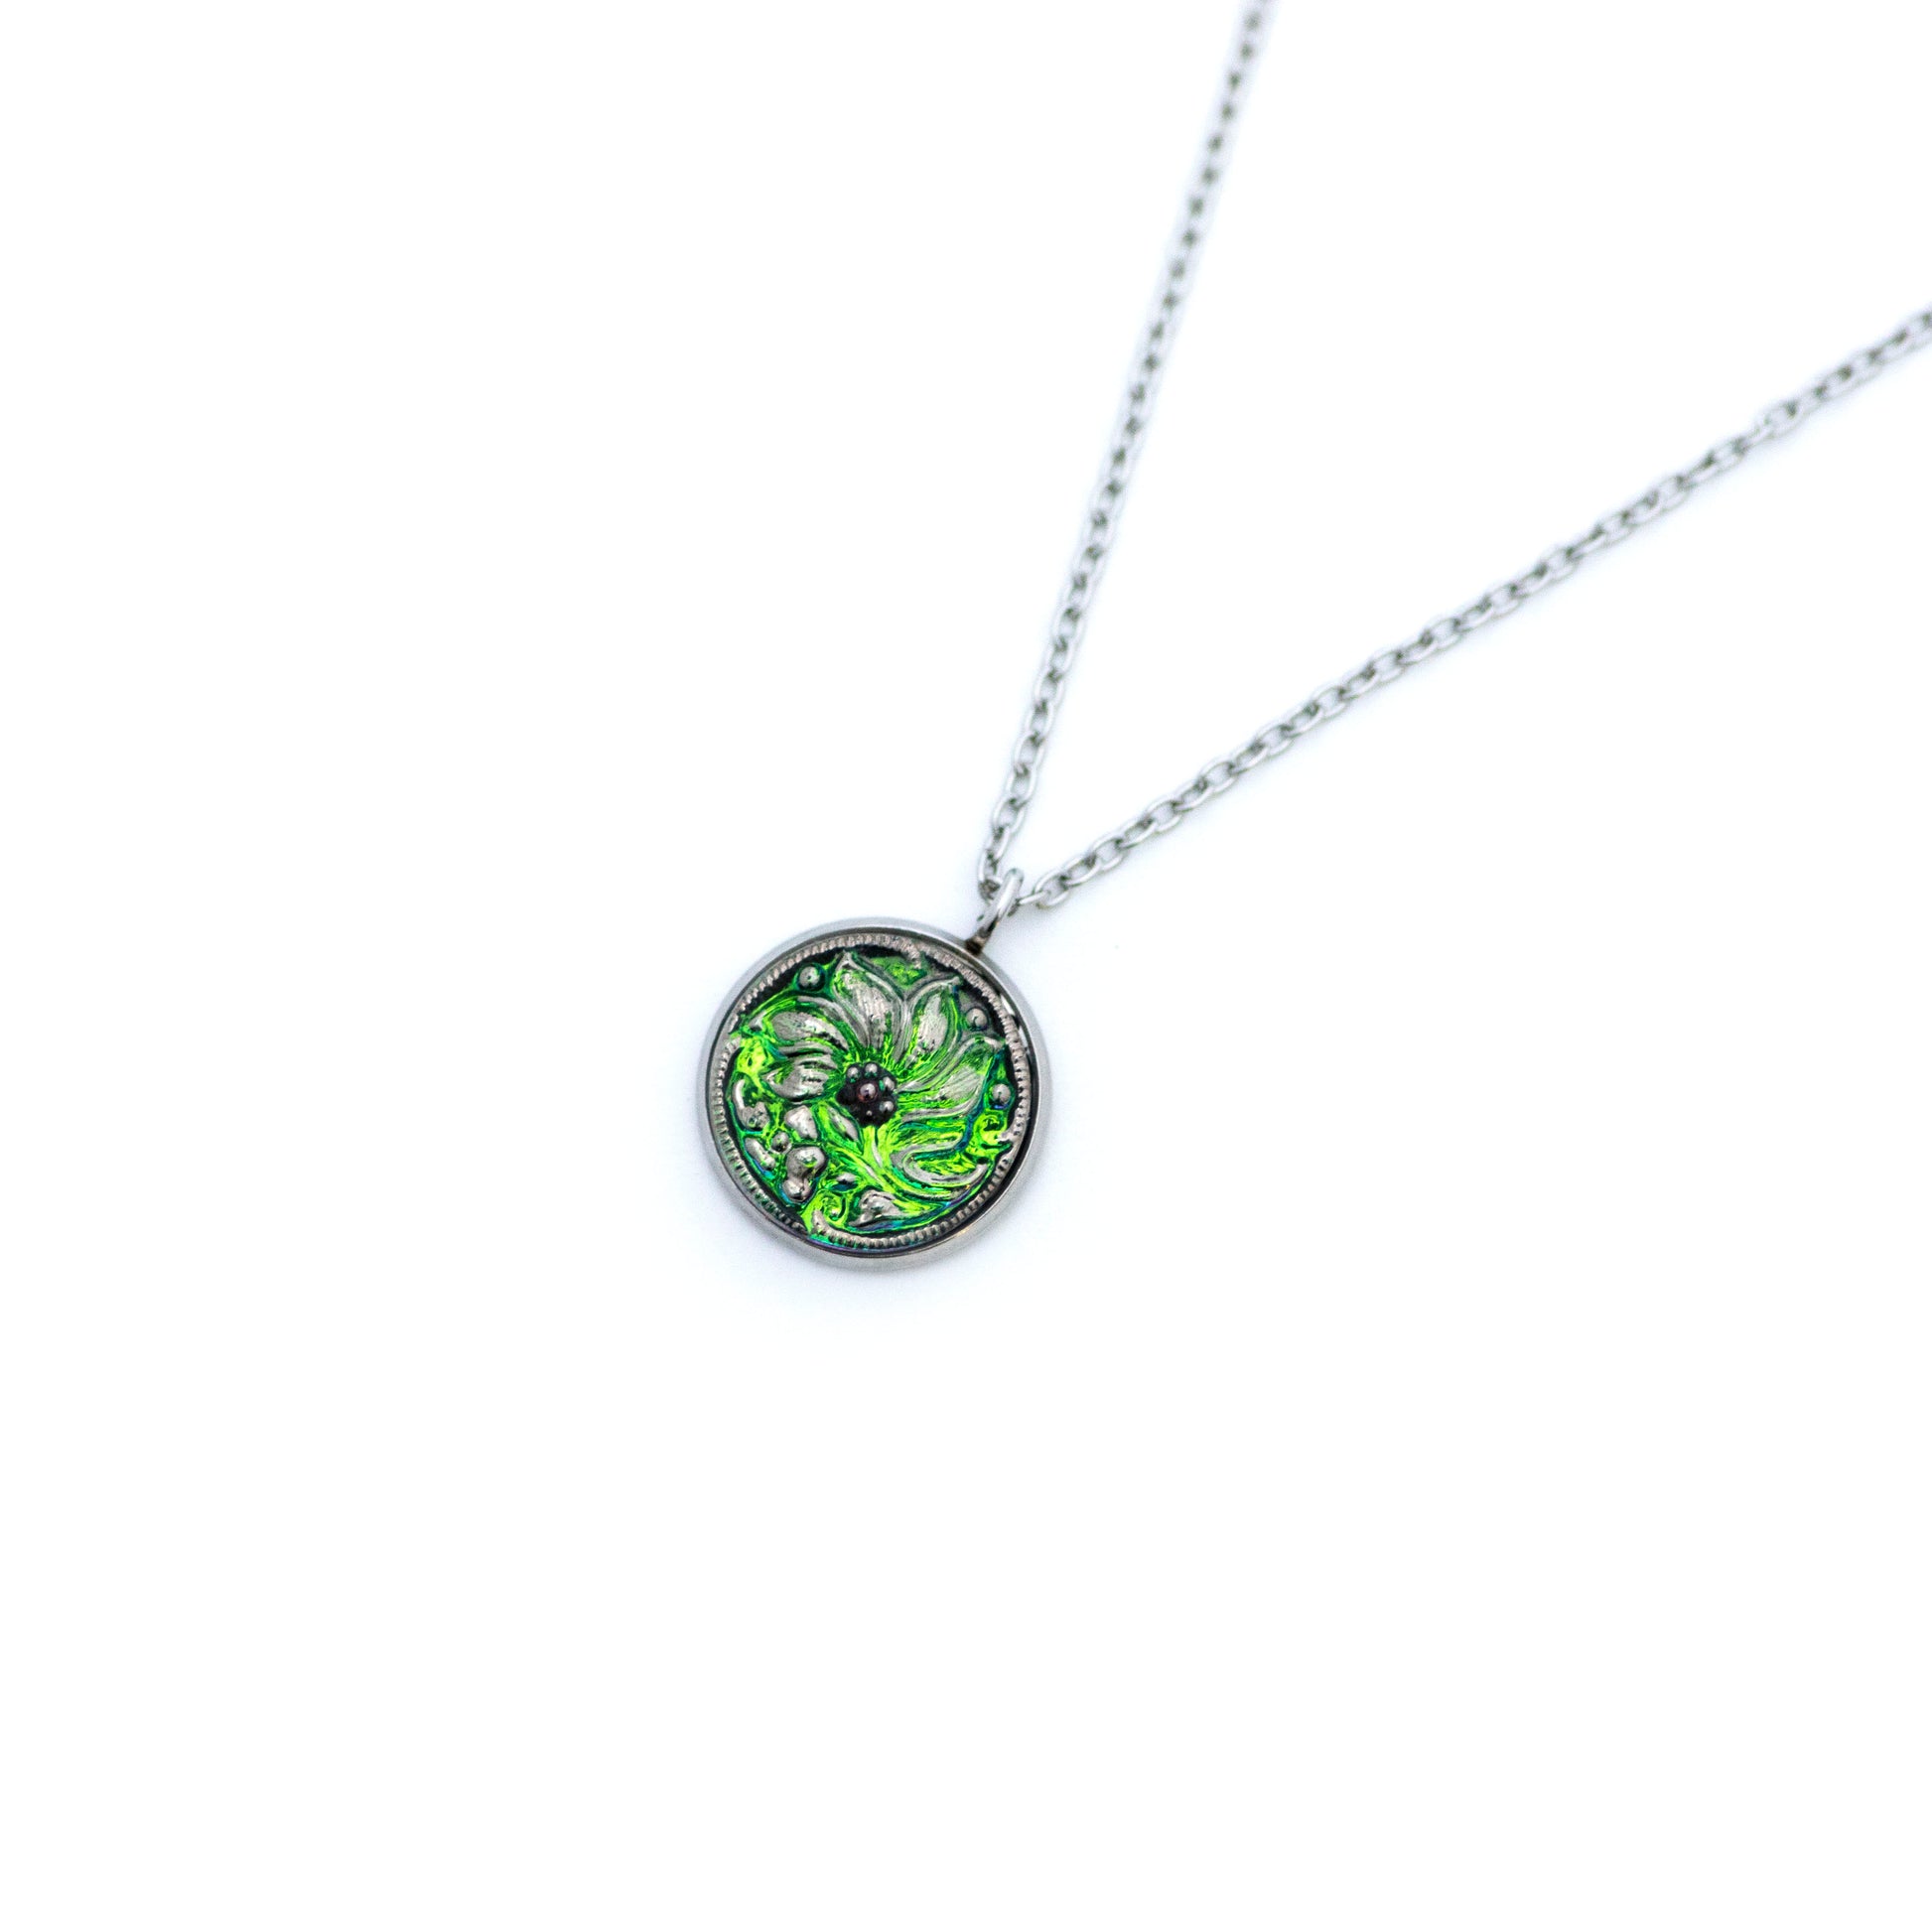 Green and silver platinum painted Czech glass button with lily lotus flower. Button pendant necklace.